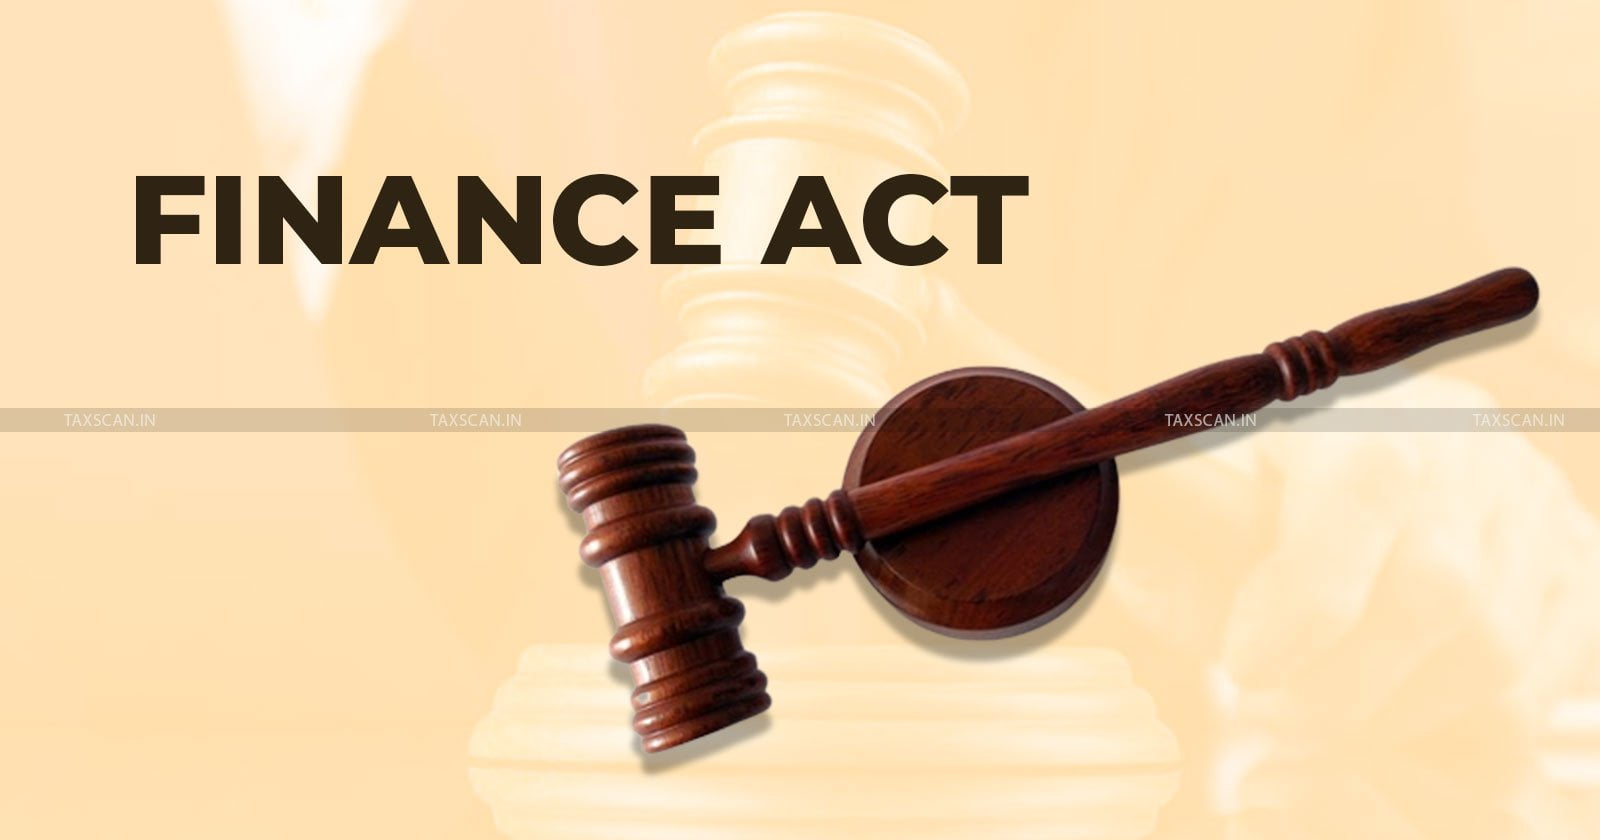 Disallowance of Expenditure - Diallowance - Income Tax Act - Non-Deduction - TDS restricted - ITAT - TAXSCAN